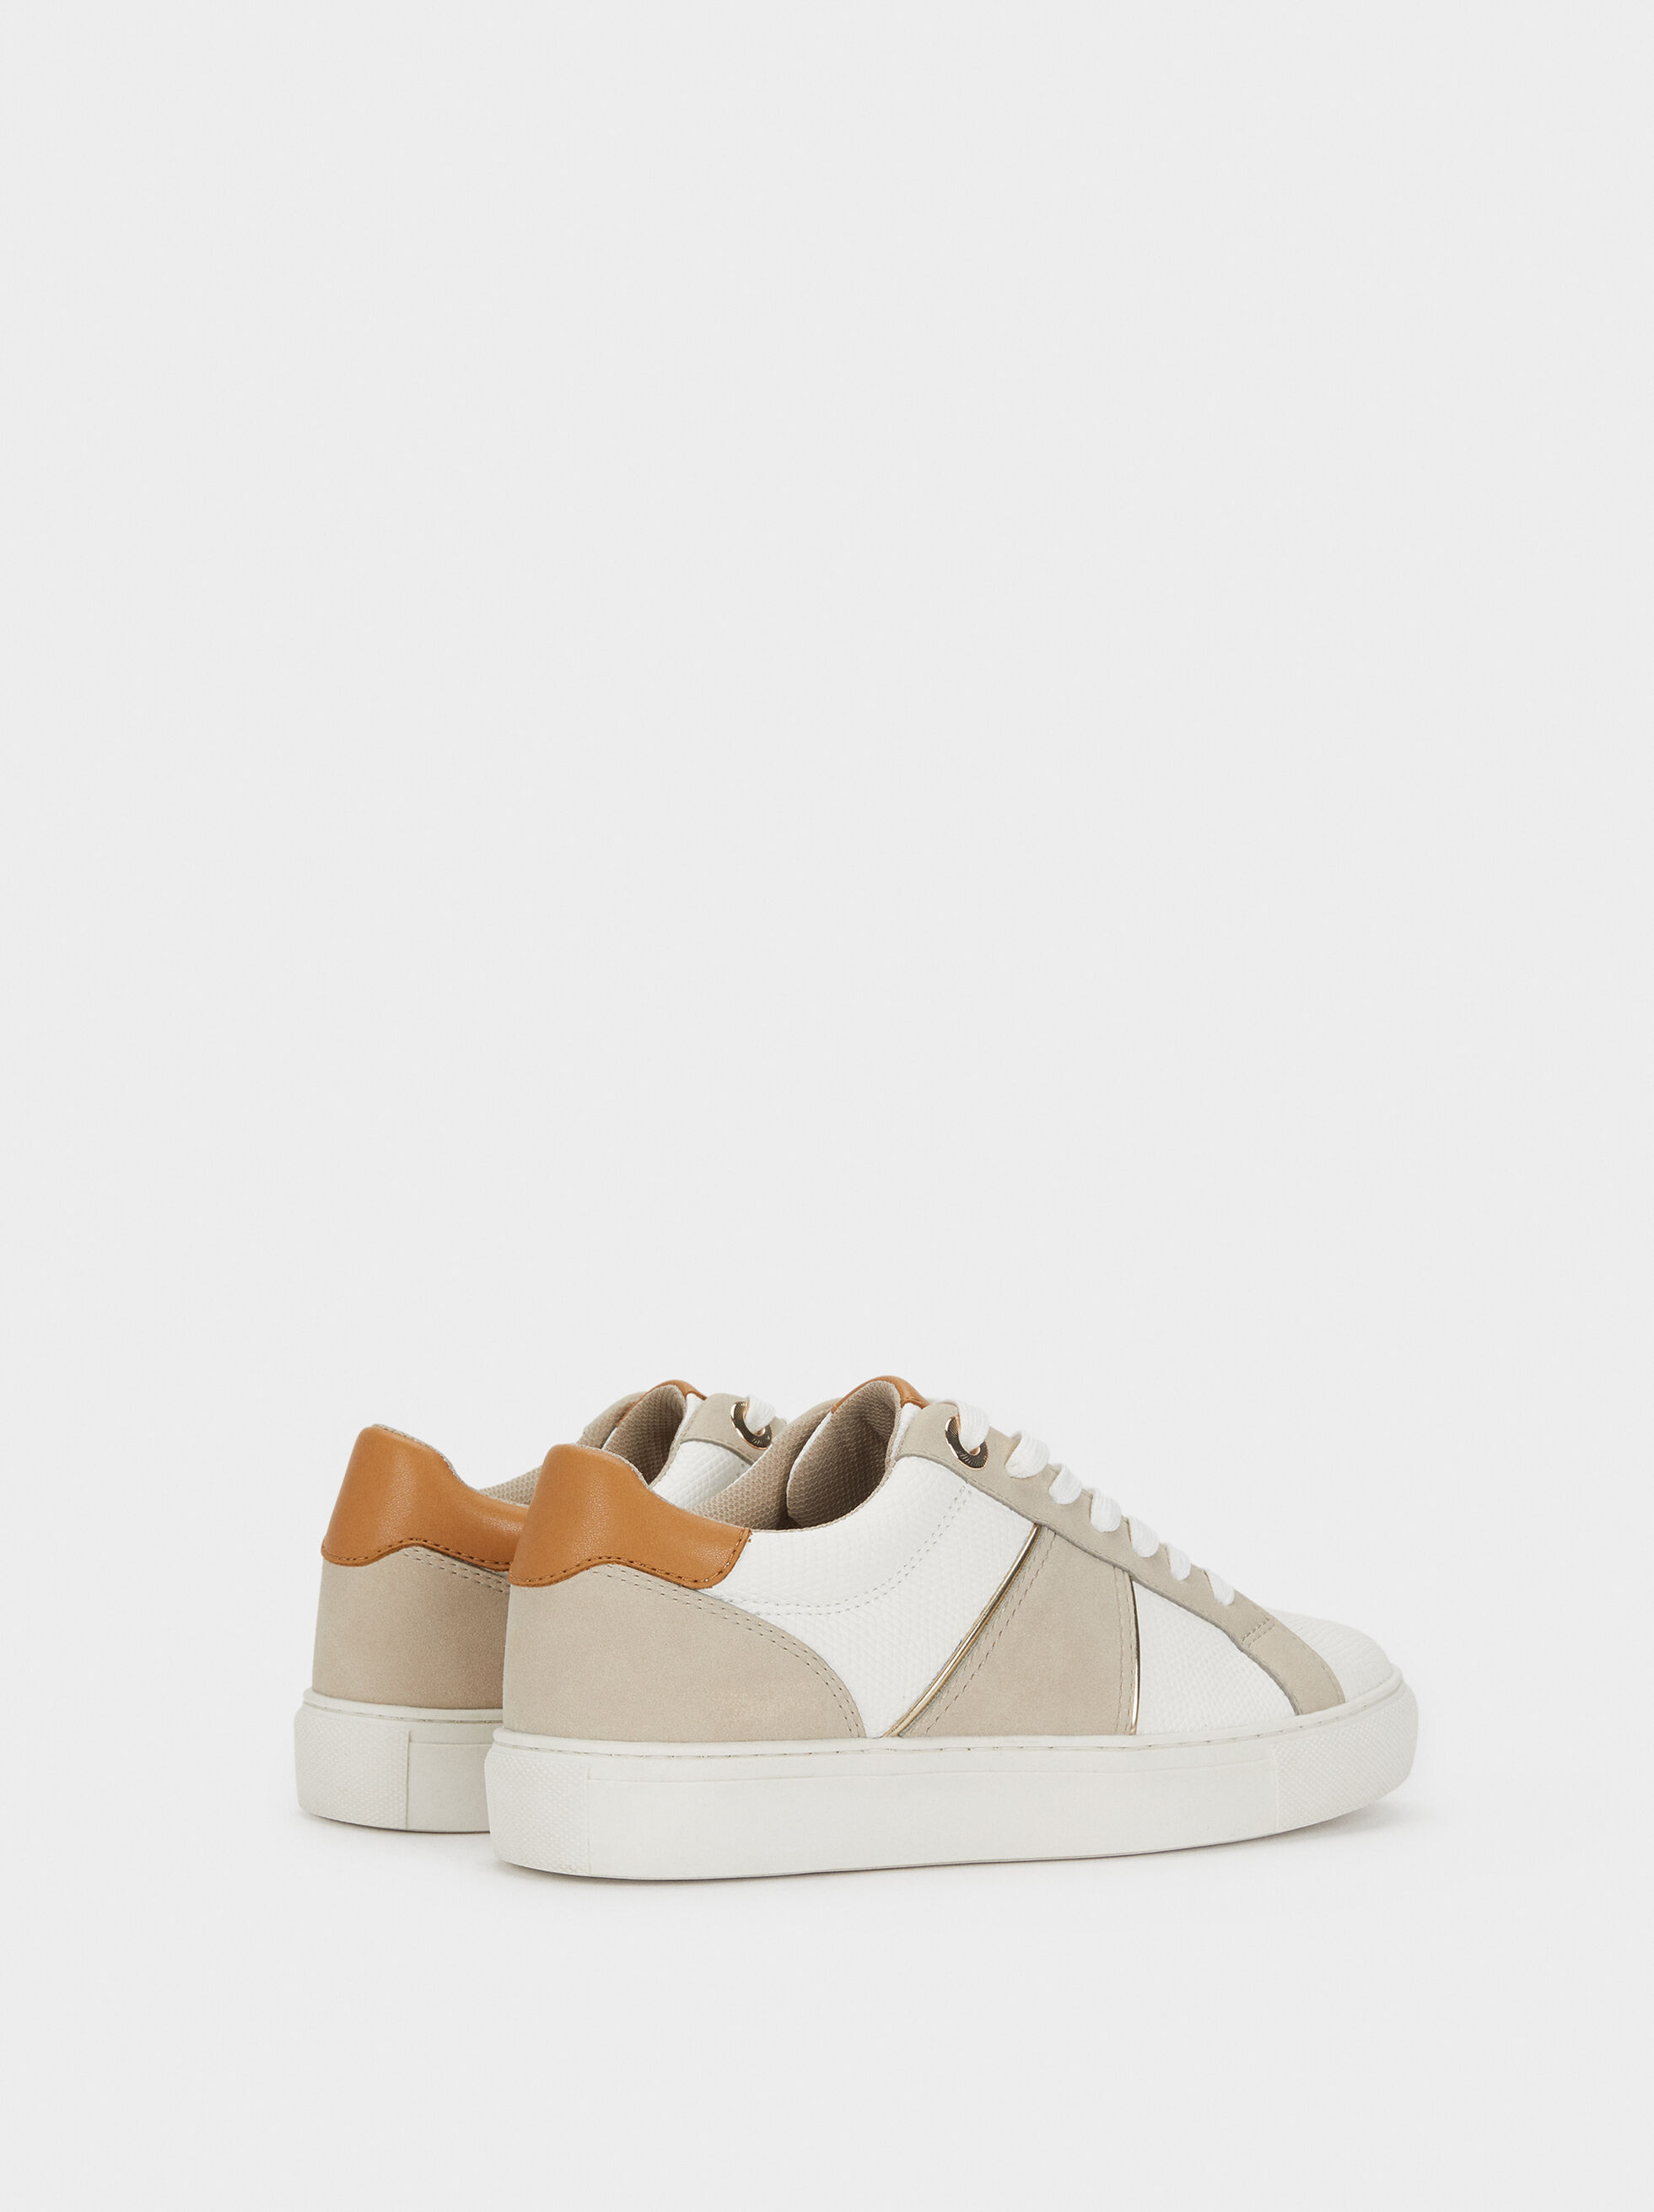 white and tan trainers